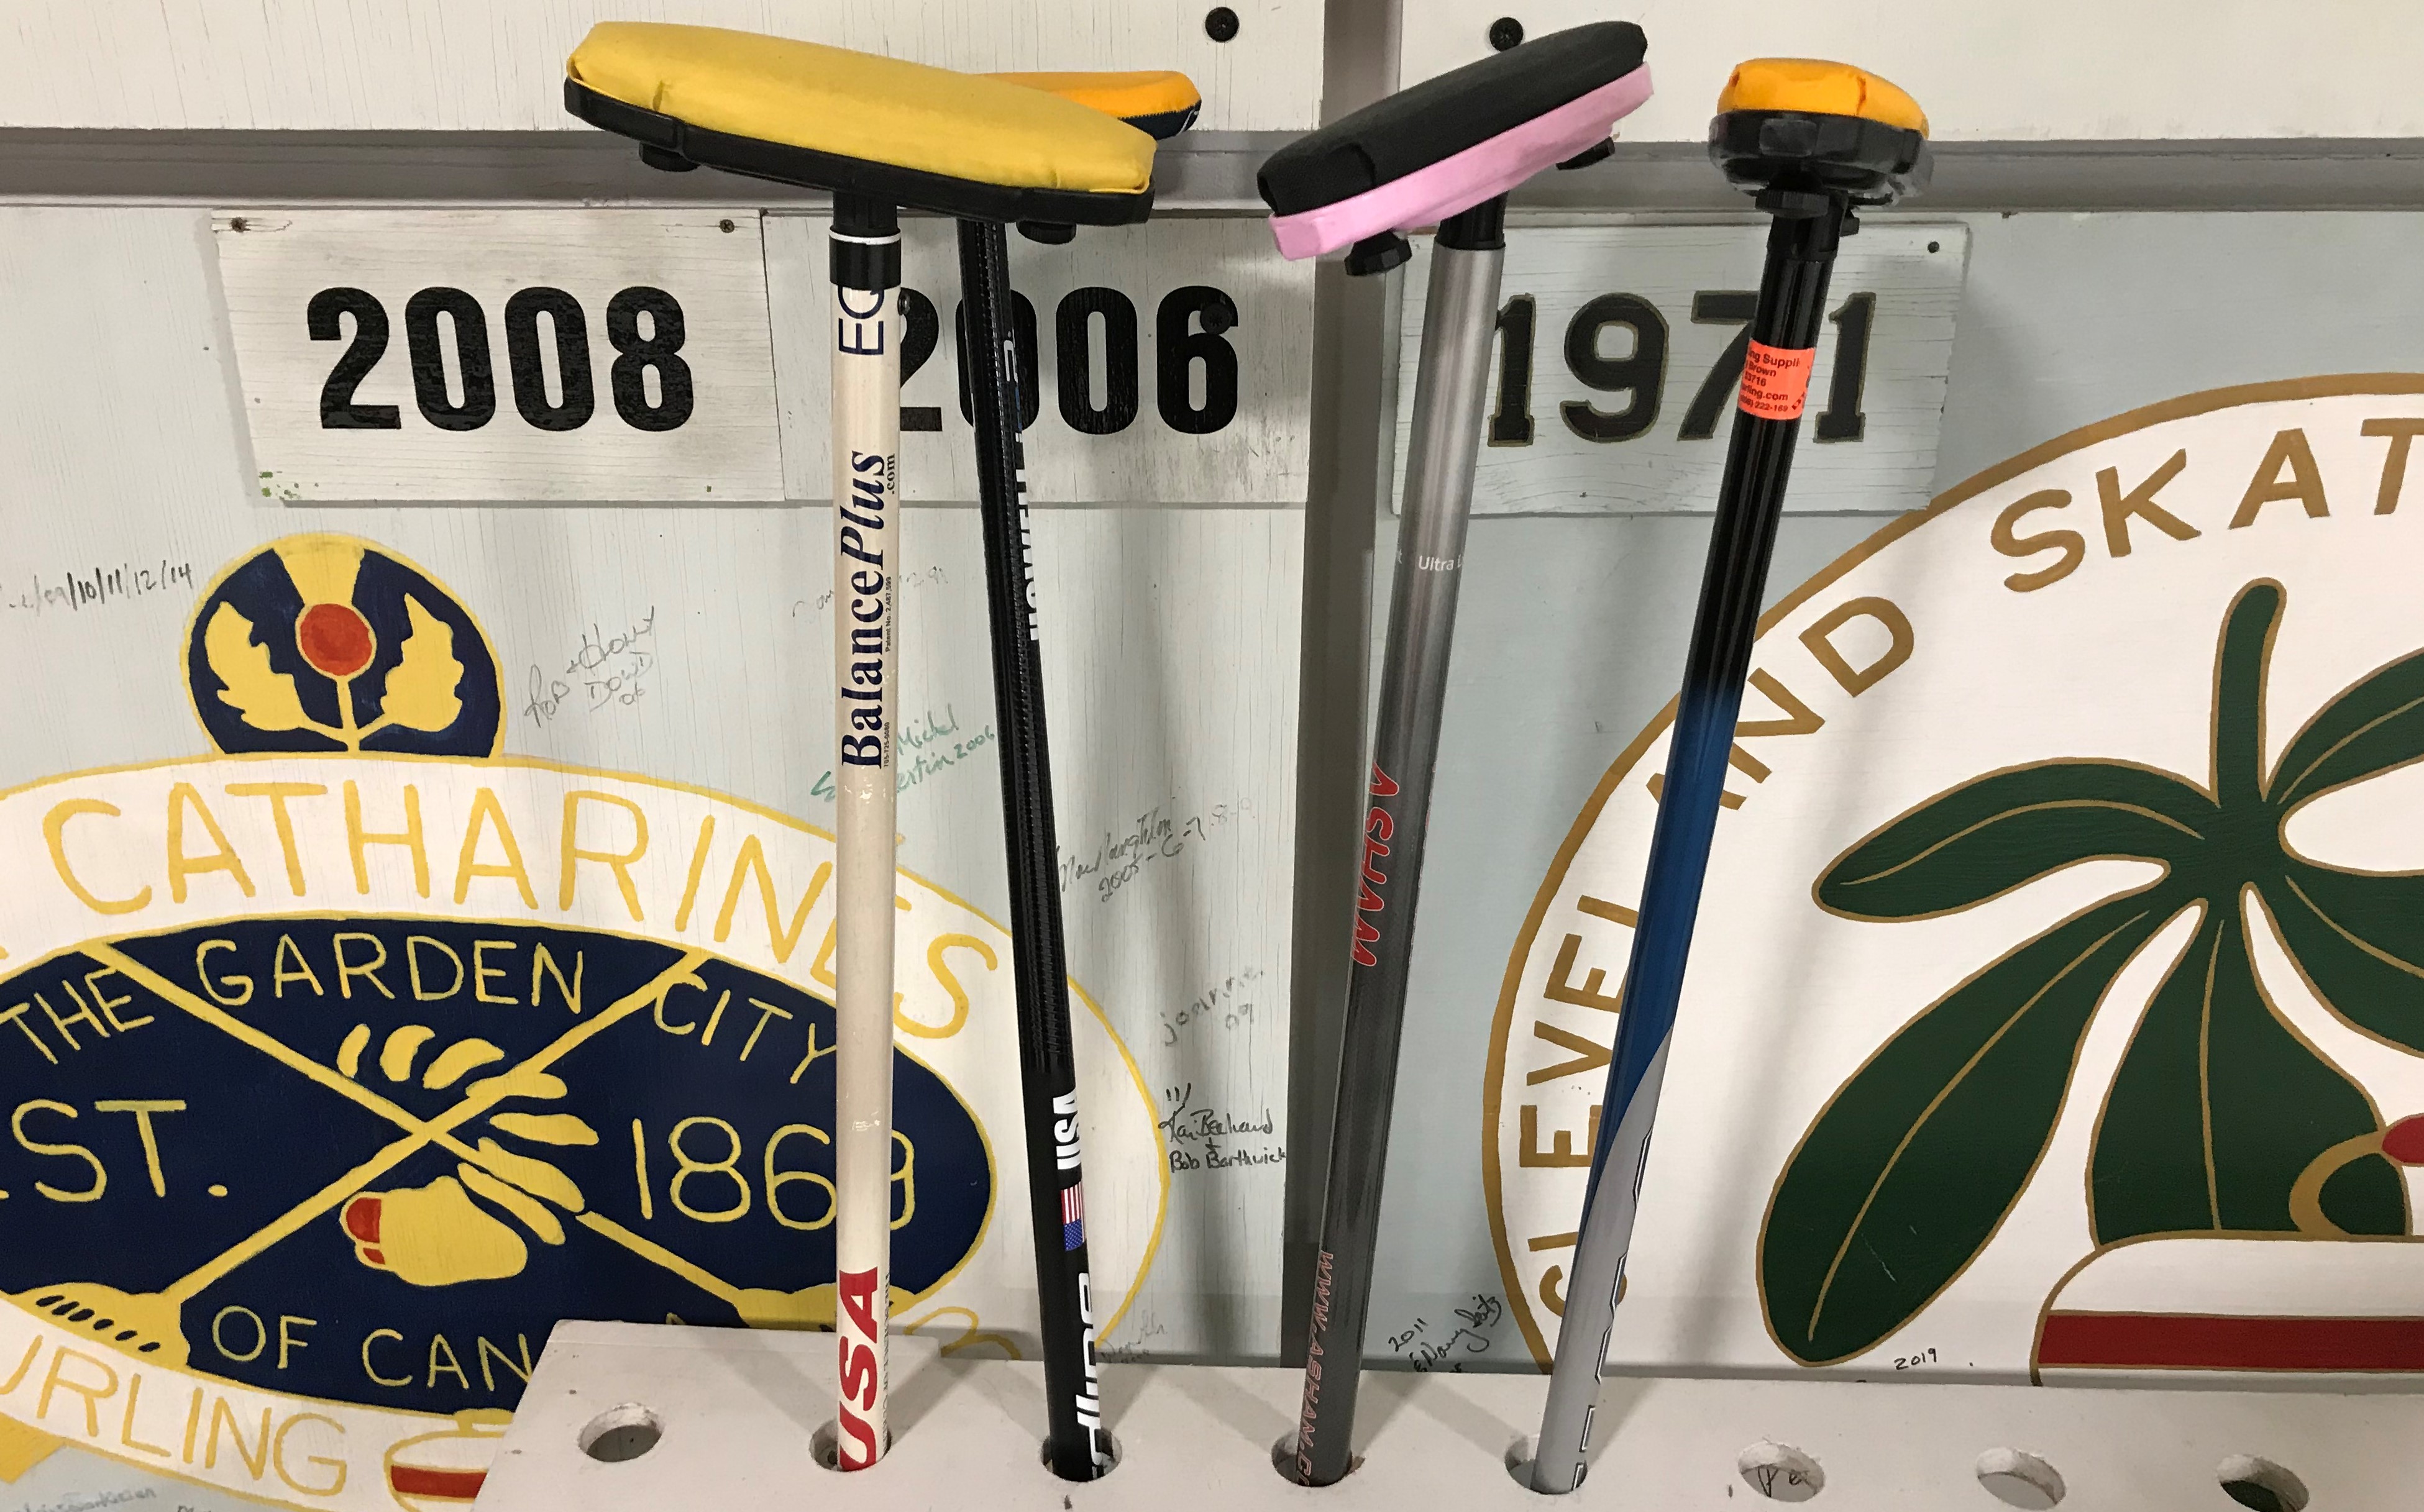 Mayfield Curling Club, adhering to social distancing, has just opened in its new home in Warrensville Heights. Here’s a look at what the club and its facility are about.